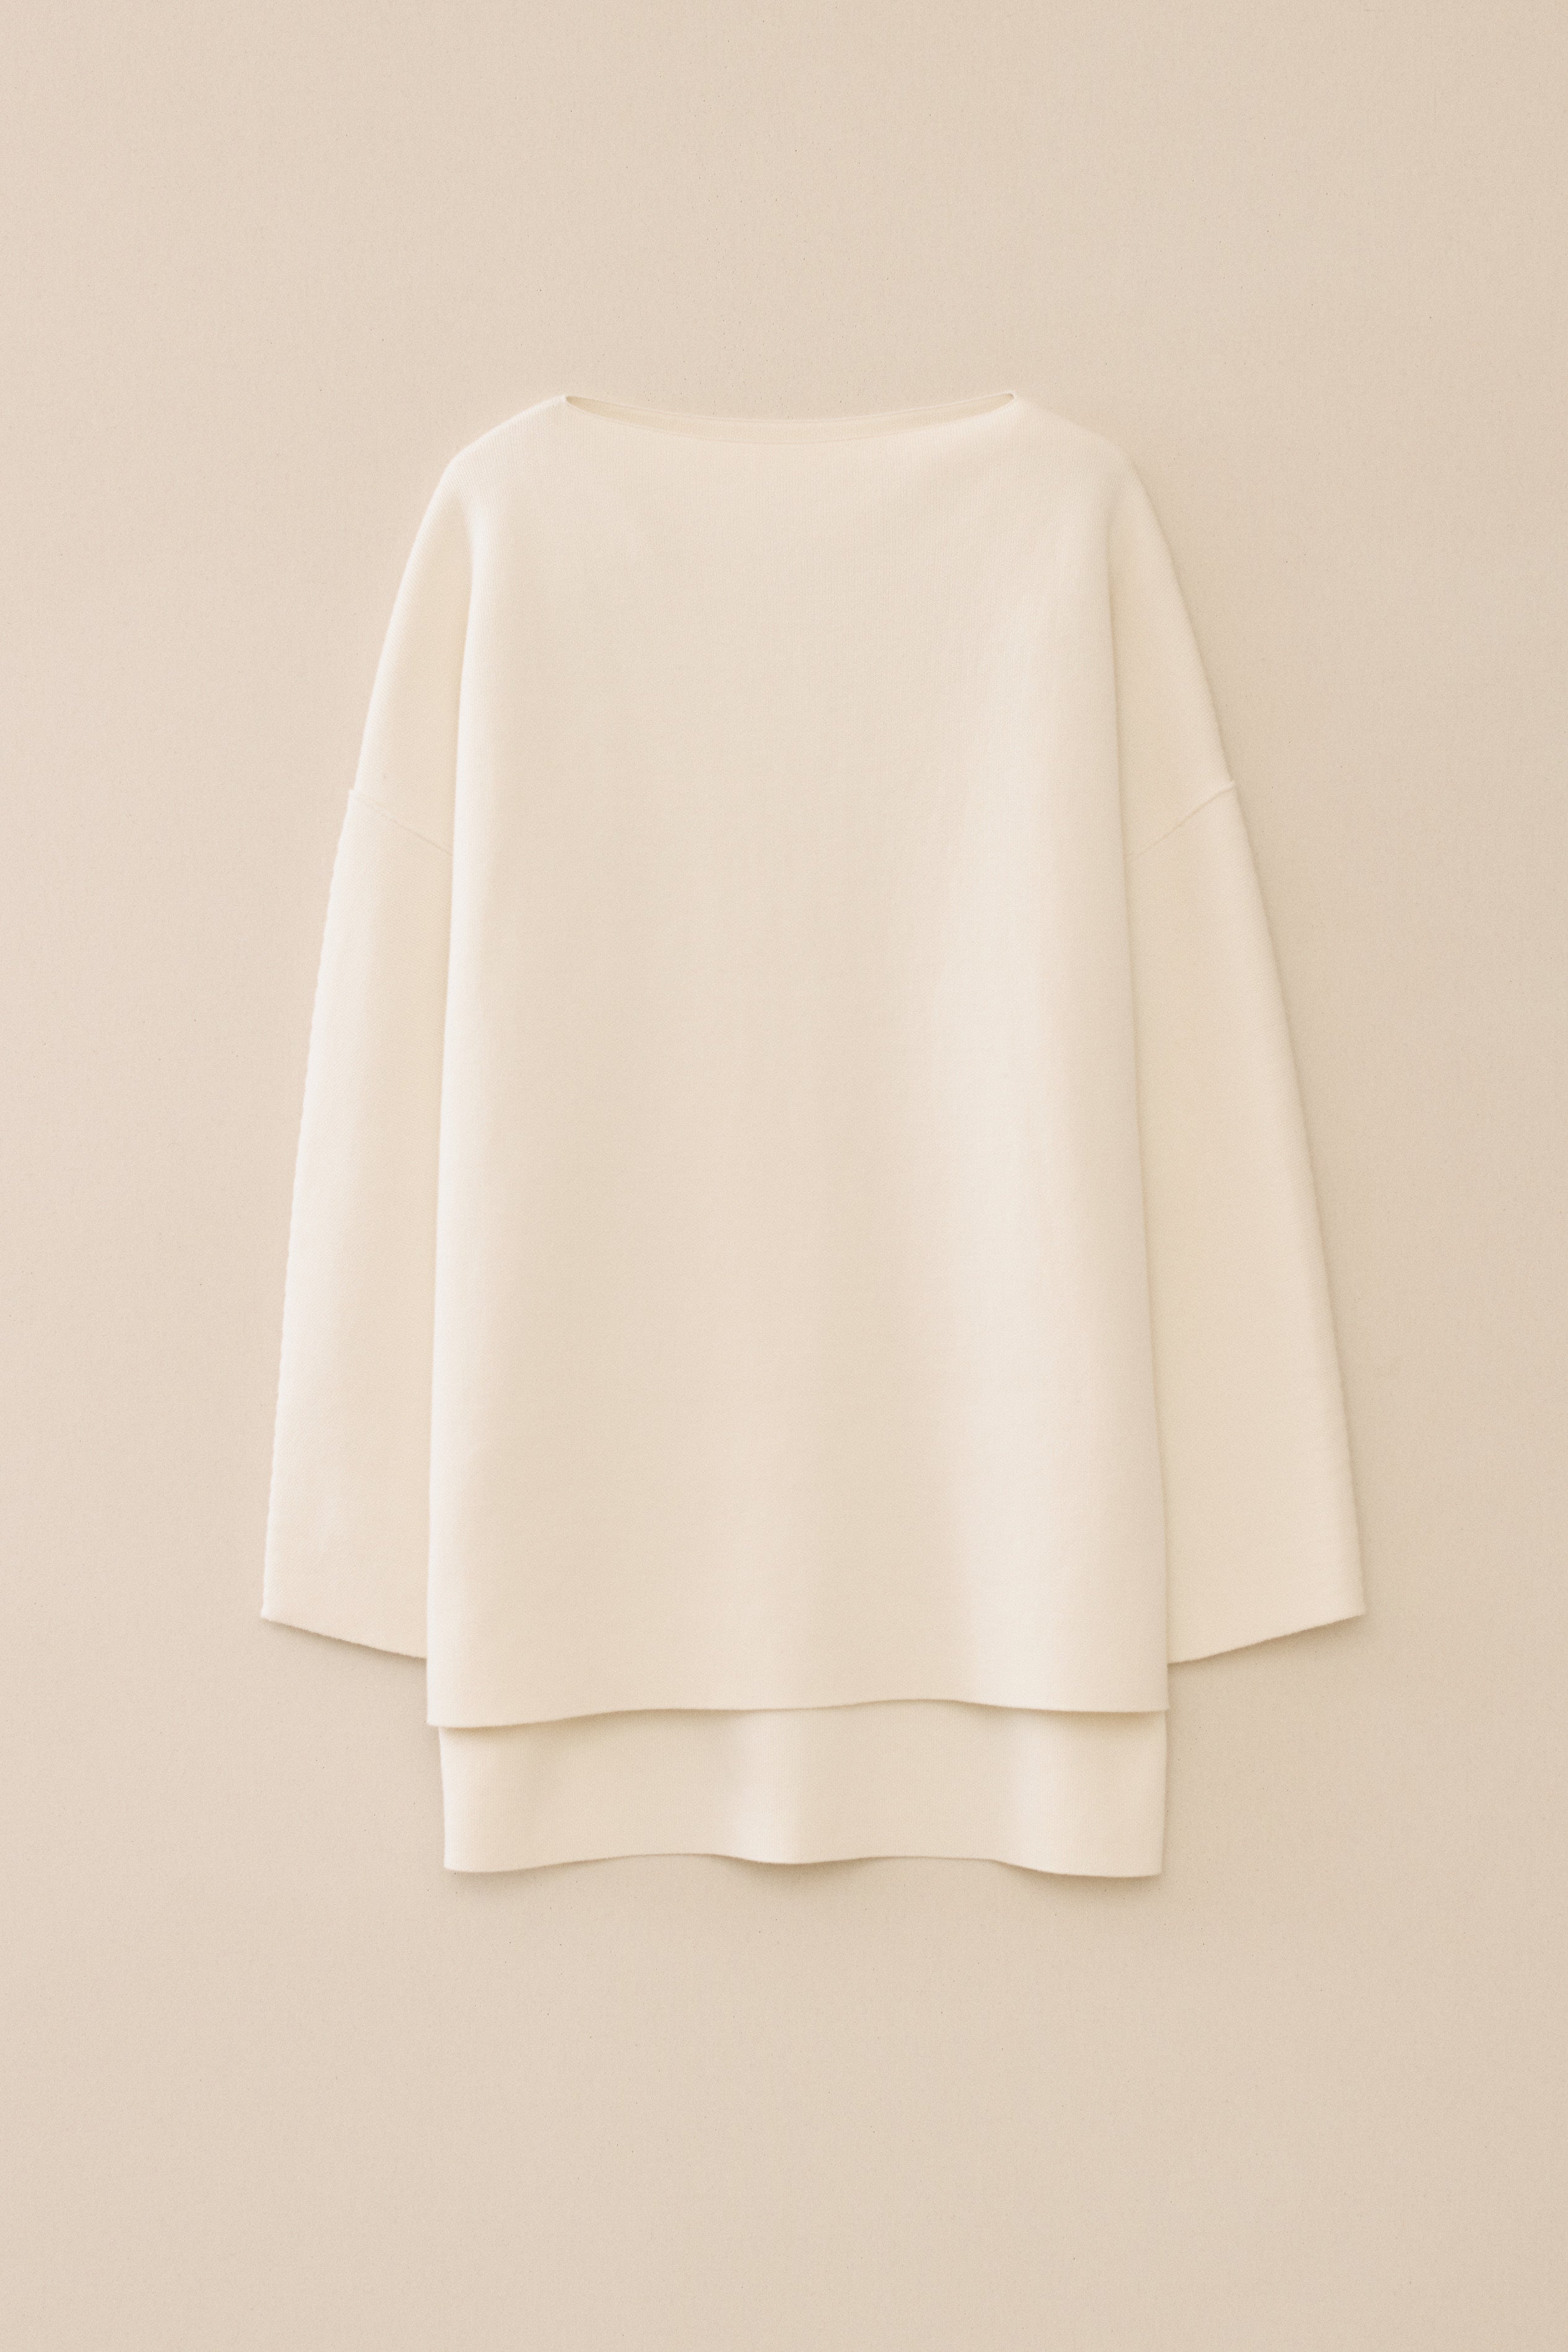 DOUBLE KNIT BOATNECK - hover image